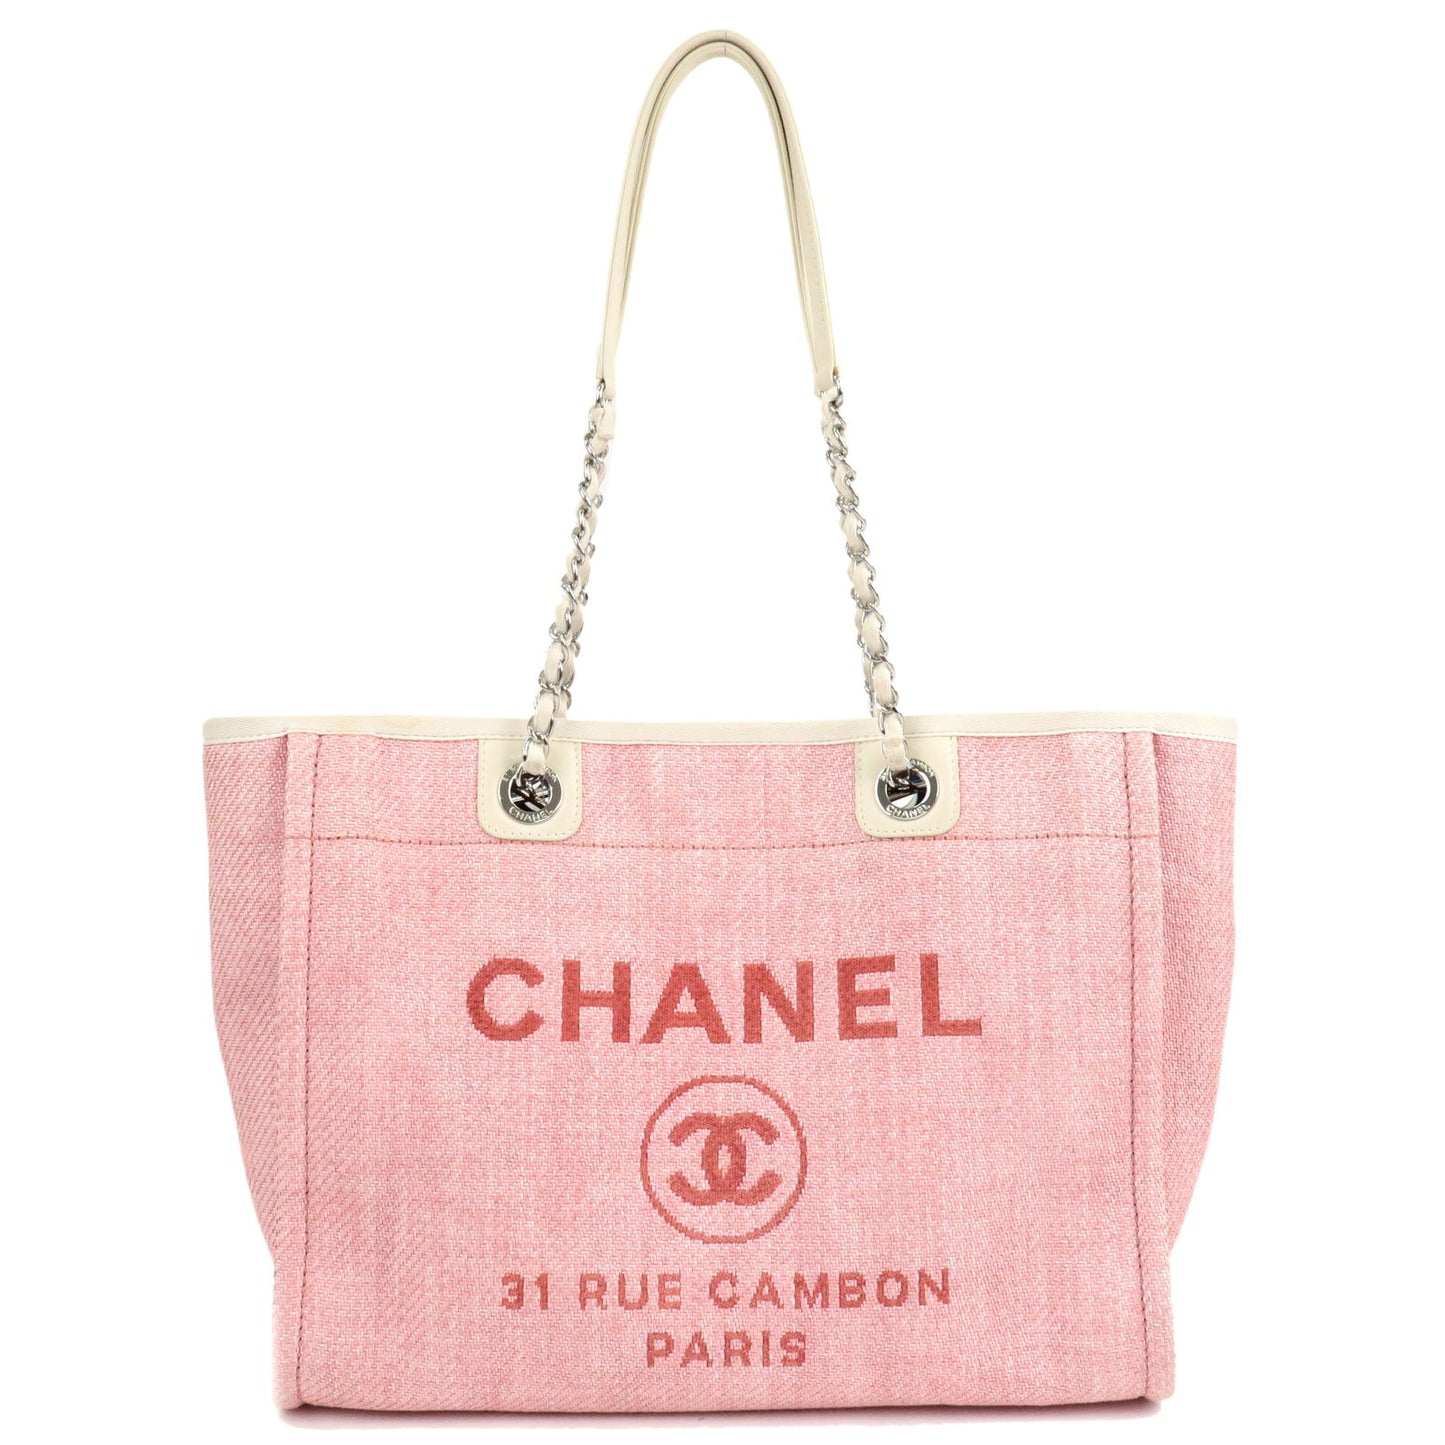 CHANEL-Deauville-MM-Mix-Fiber-Leather-Chain-Tote-Bag-Pink-A67001